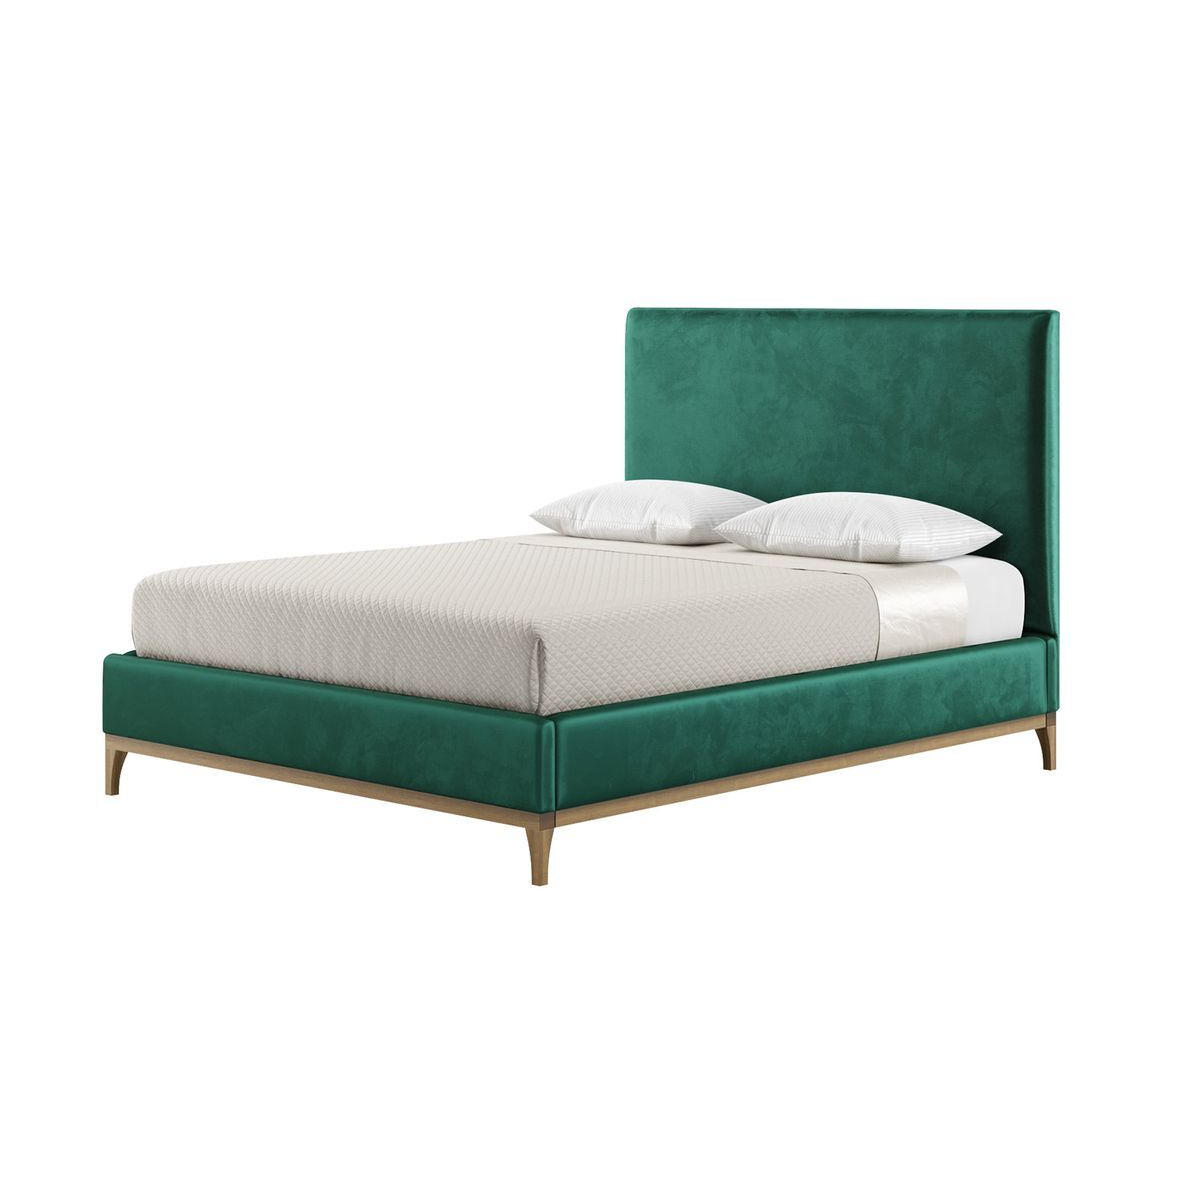 Diane 5ft King Size Bed Frame with modern smooth headboard, dark green, Leg colour: wax black - image 1